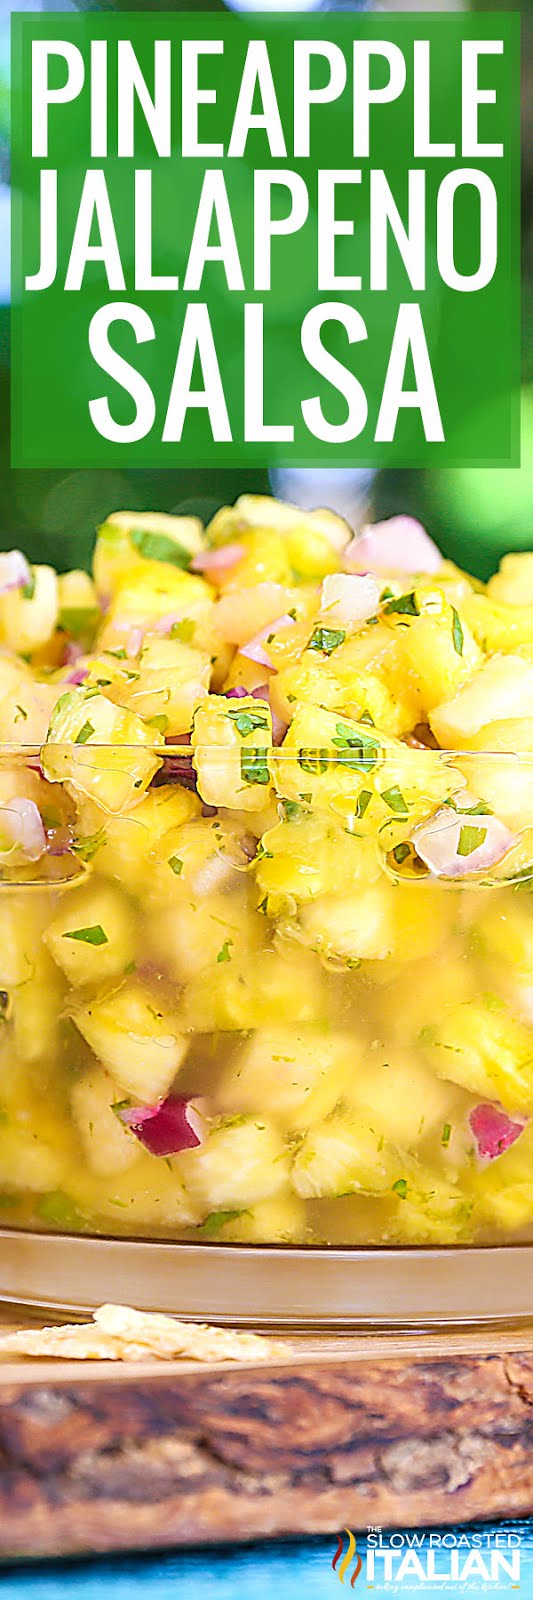 titled image shows bowl of pineapple jalapeno salsa